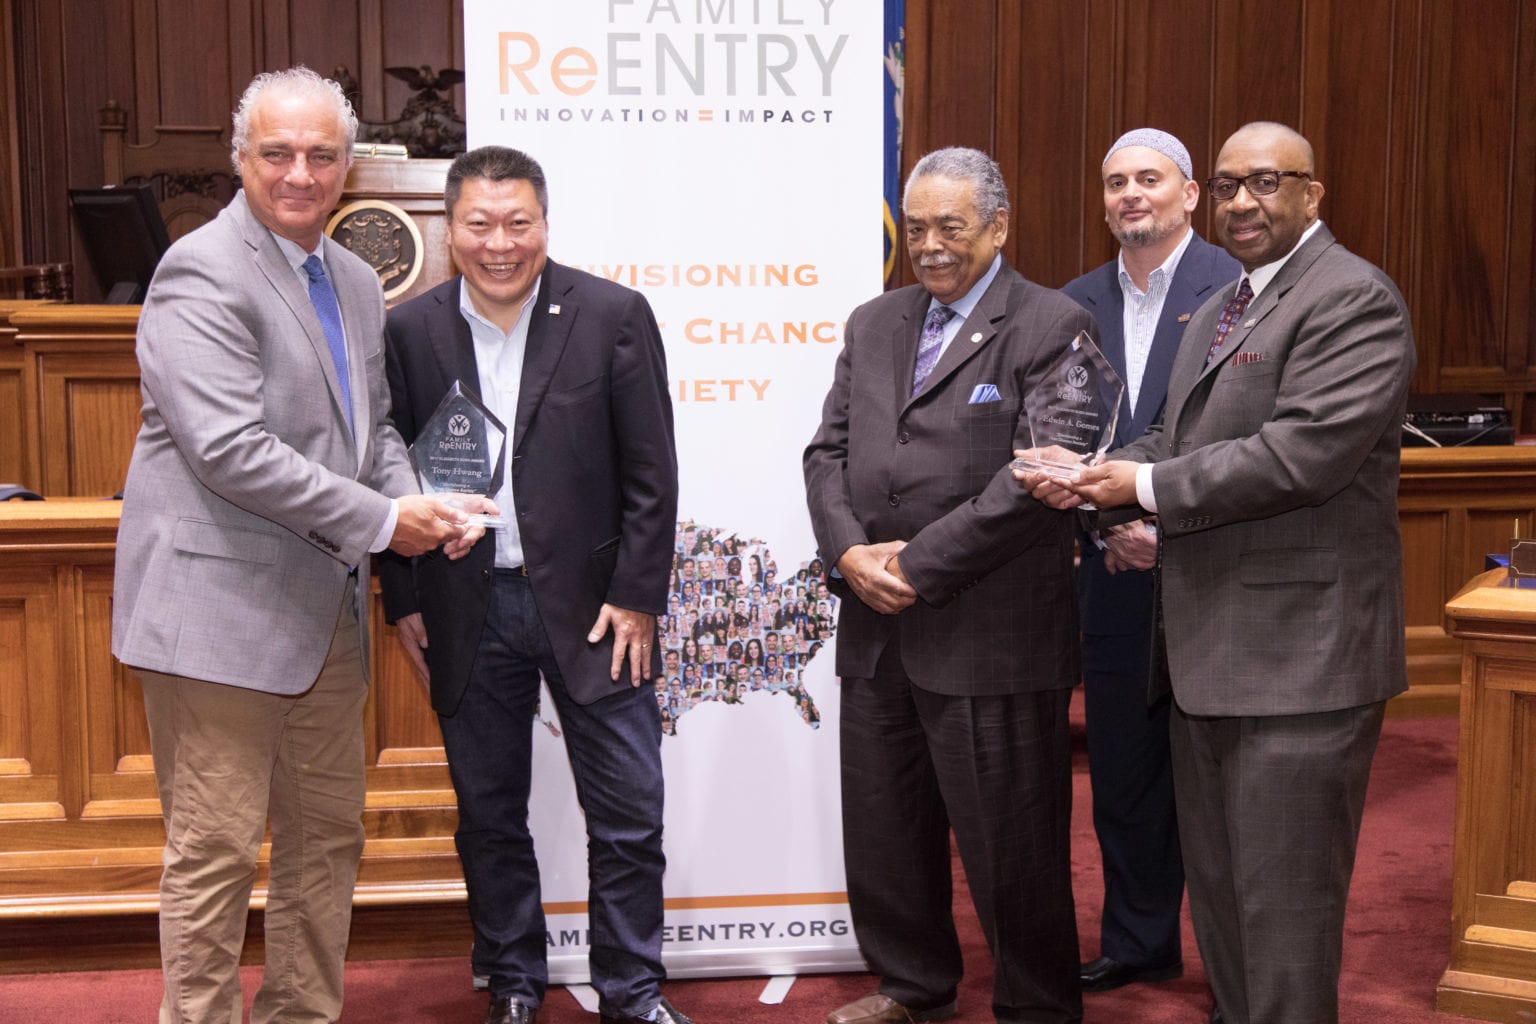 State Senator Tony Hwang and State Senator Ed Gomes receive the 2017 Elizabeth Bush Award from Family ReEntry an organization that helps incarcerated persons make a successful transition from prison back into the community. CT State Capitol Senate Chamber, April 4, 2017.